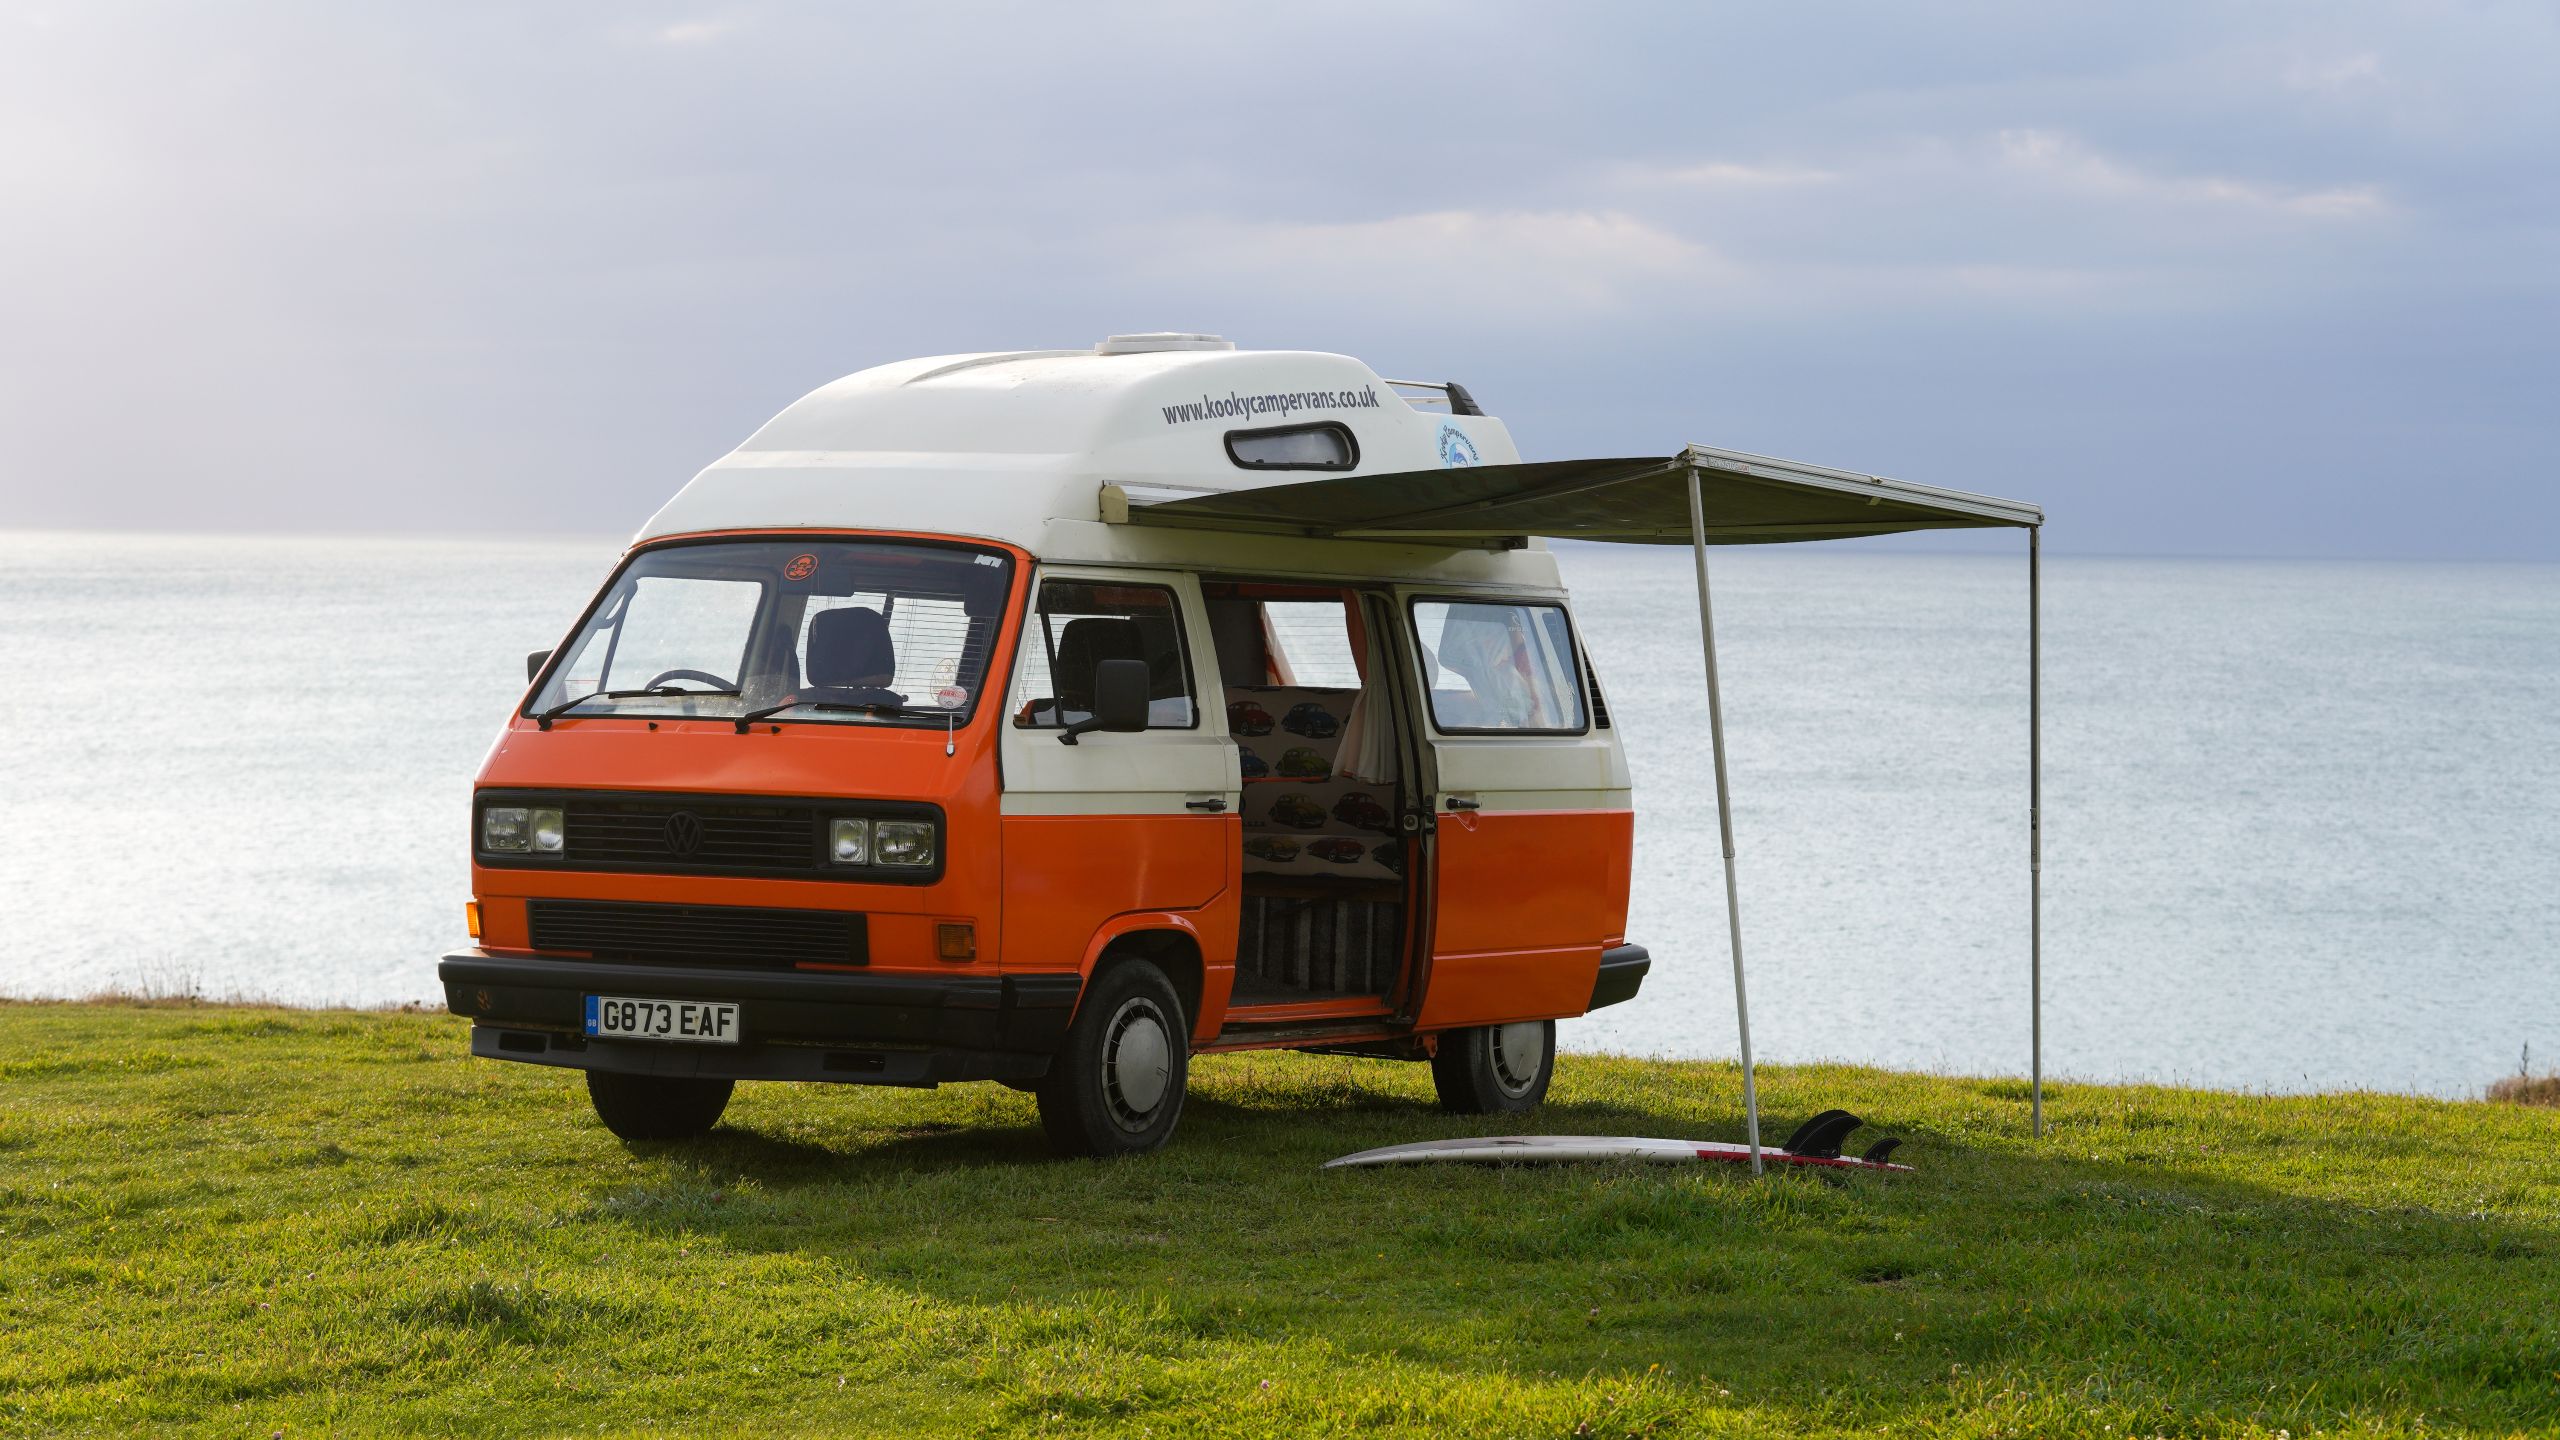 Trudi the vw campervan with surfboard 